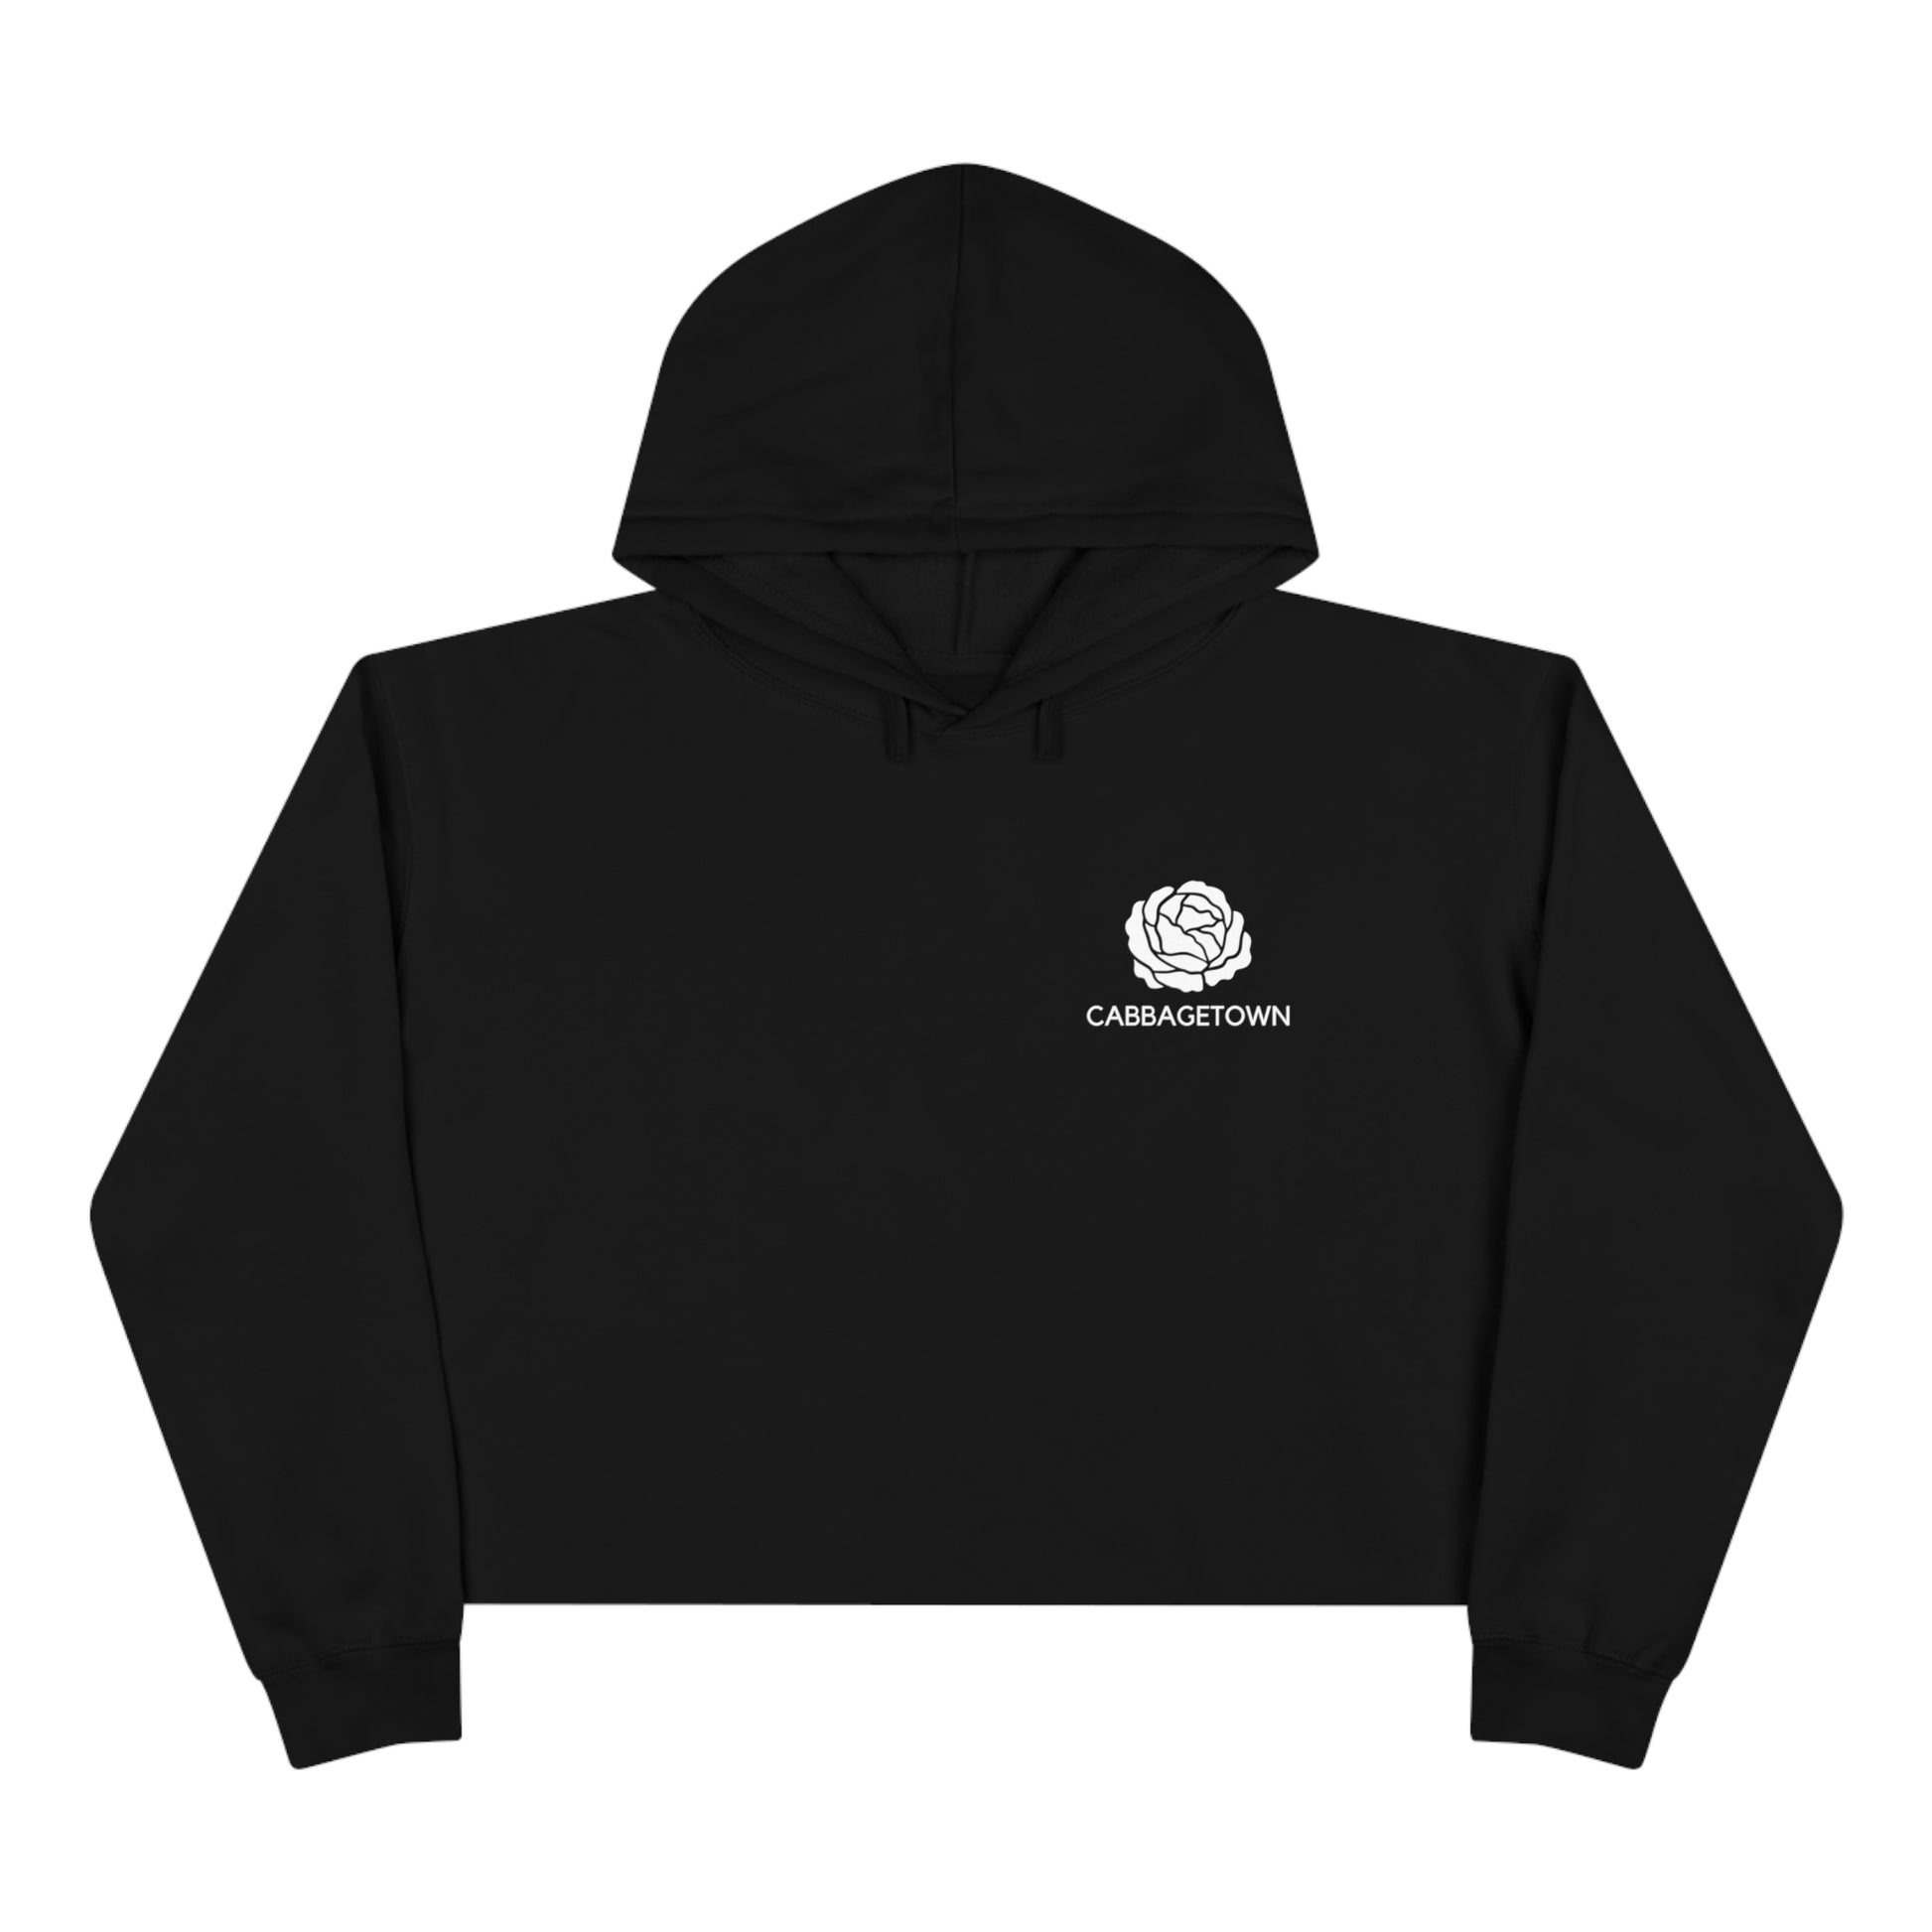 A Crop Hoodie with Monochrome Cabbagetown and Super Bargain Logo, featuring a small white rose emblem and the word "Toronto" printed on the left chest area by Printify.